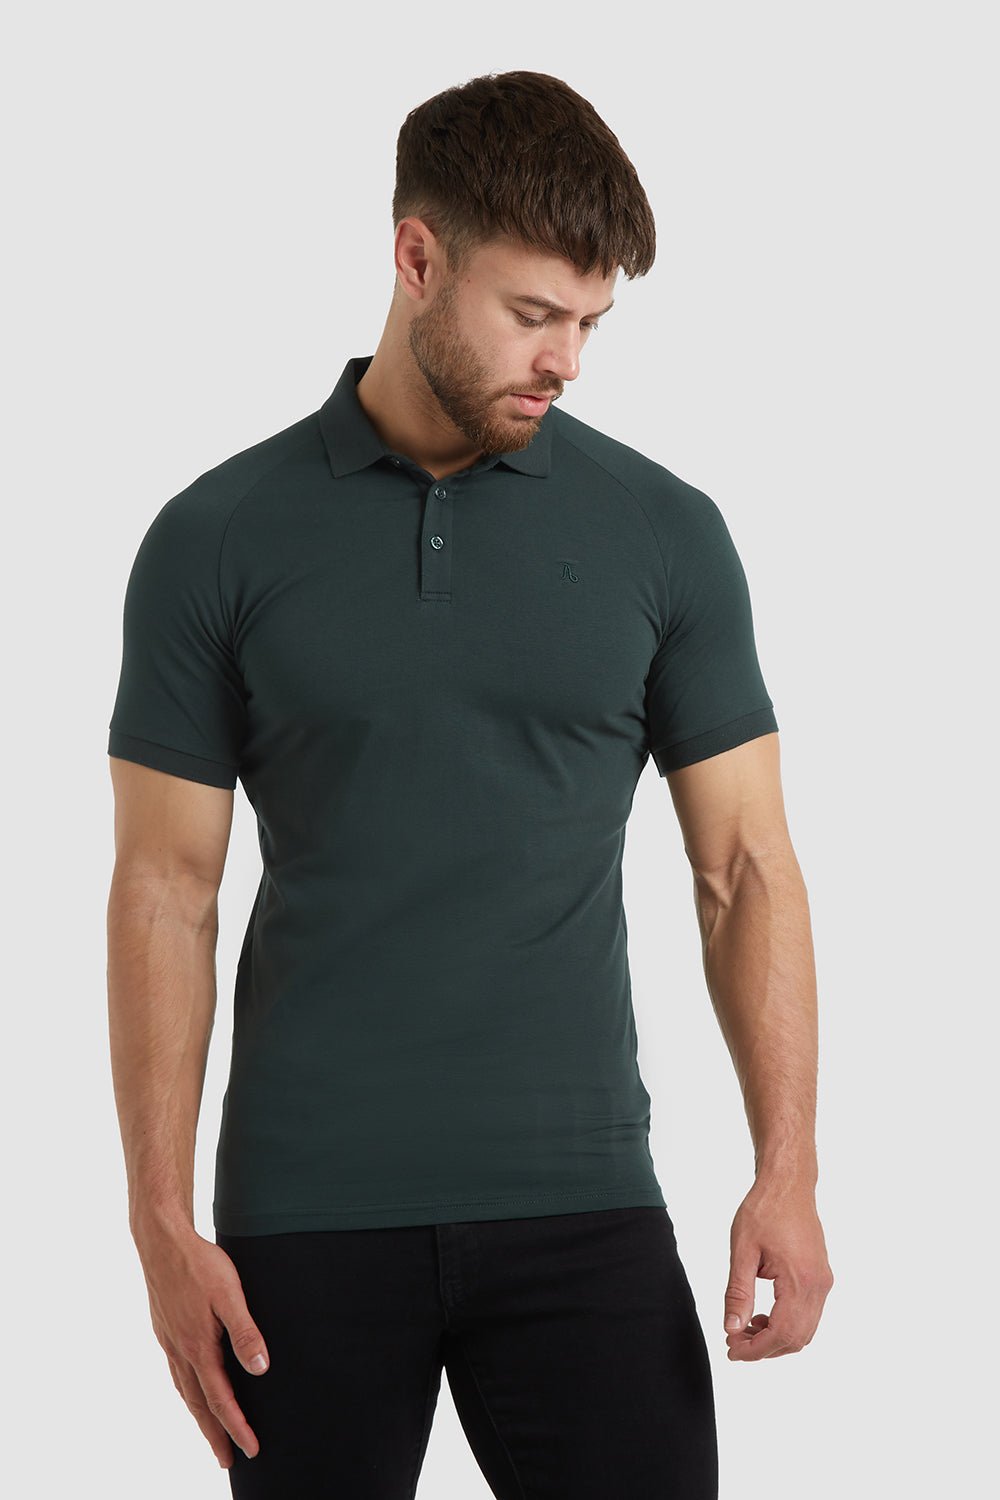 Can Polo Shirts Be Tailored? How Should A Polo Fit